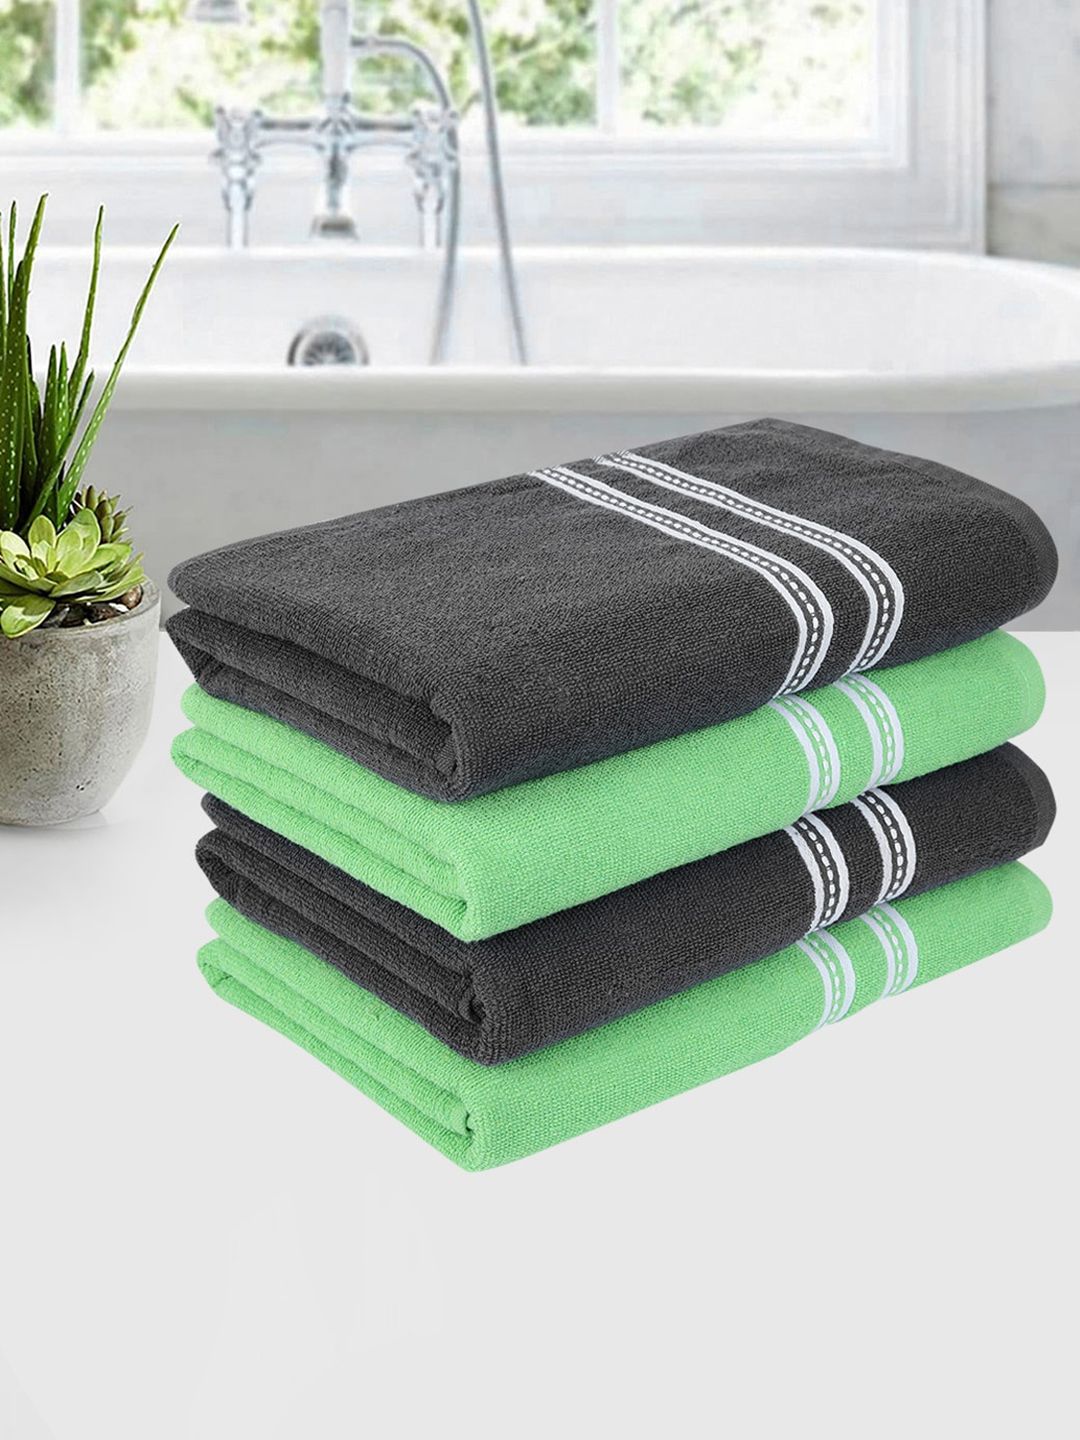 ROMEE Set Of 4 Green & Grey Solid 500 GSM Cotton Bath Towels Price in India